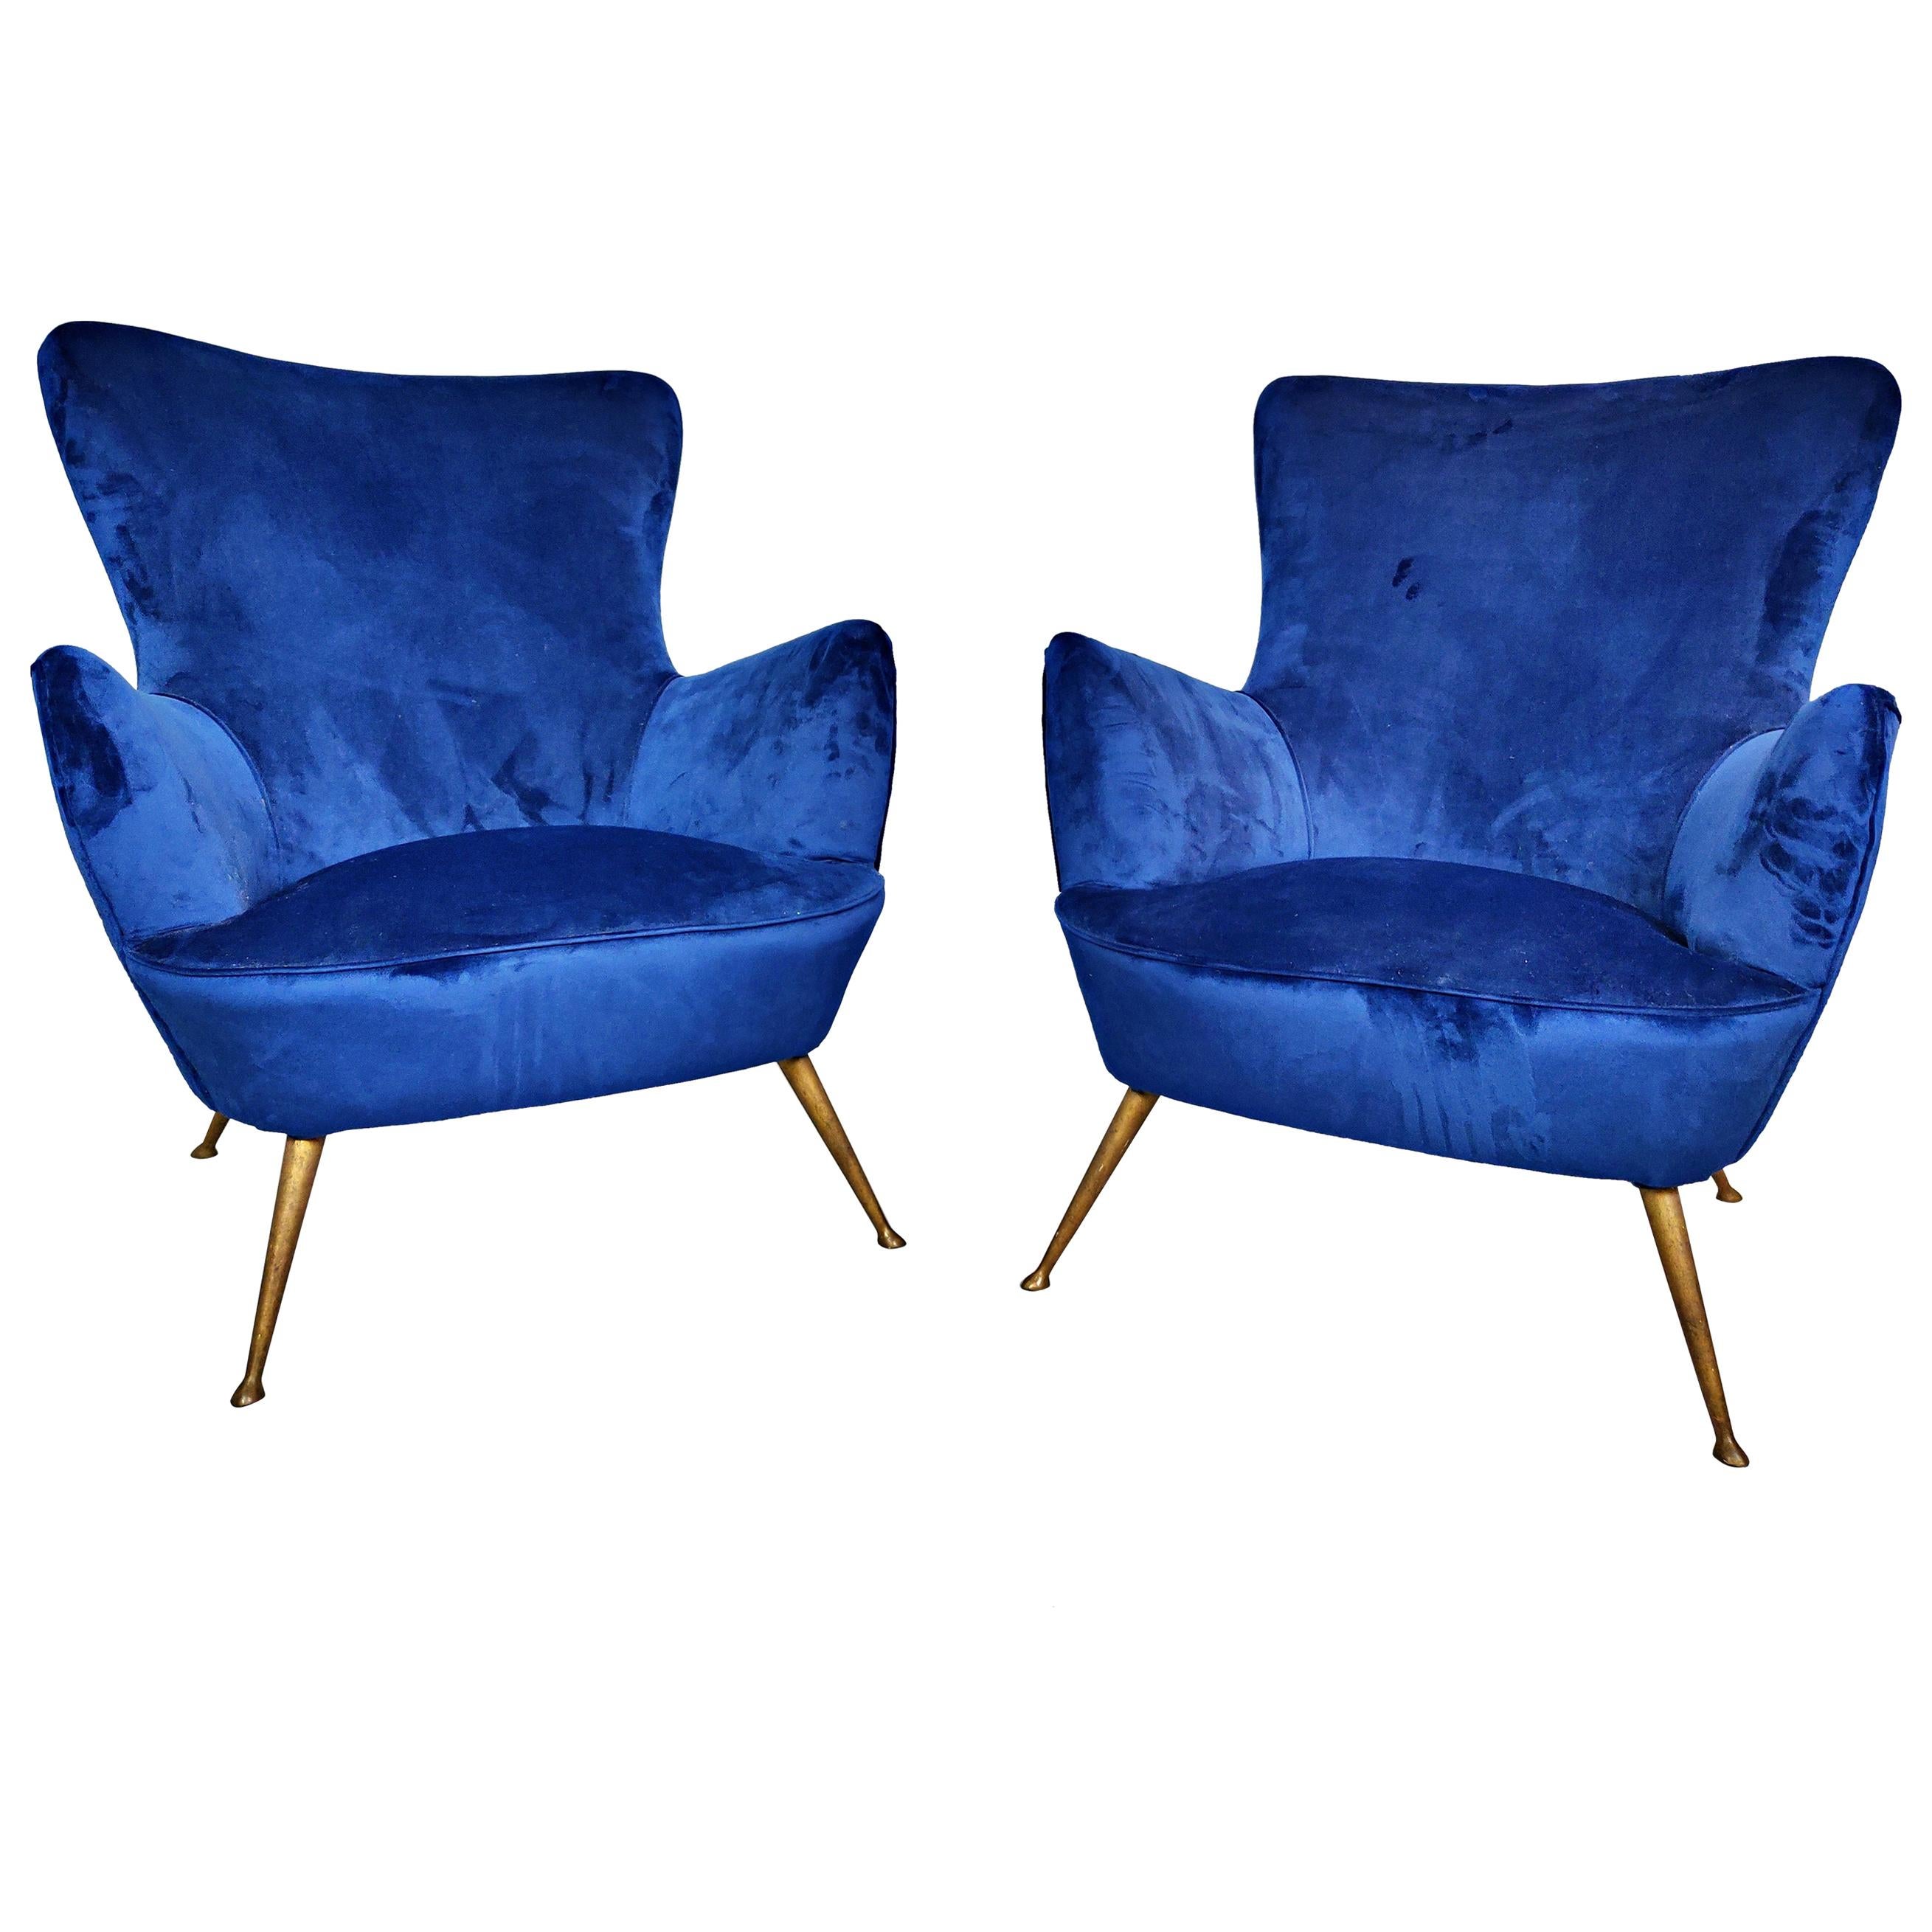 Pair of Italian Armchairs, New Upholstery, 1950s